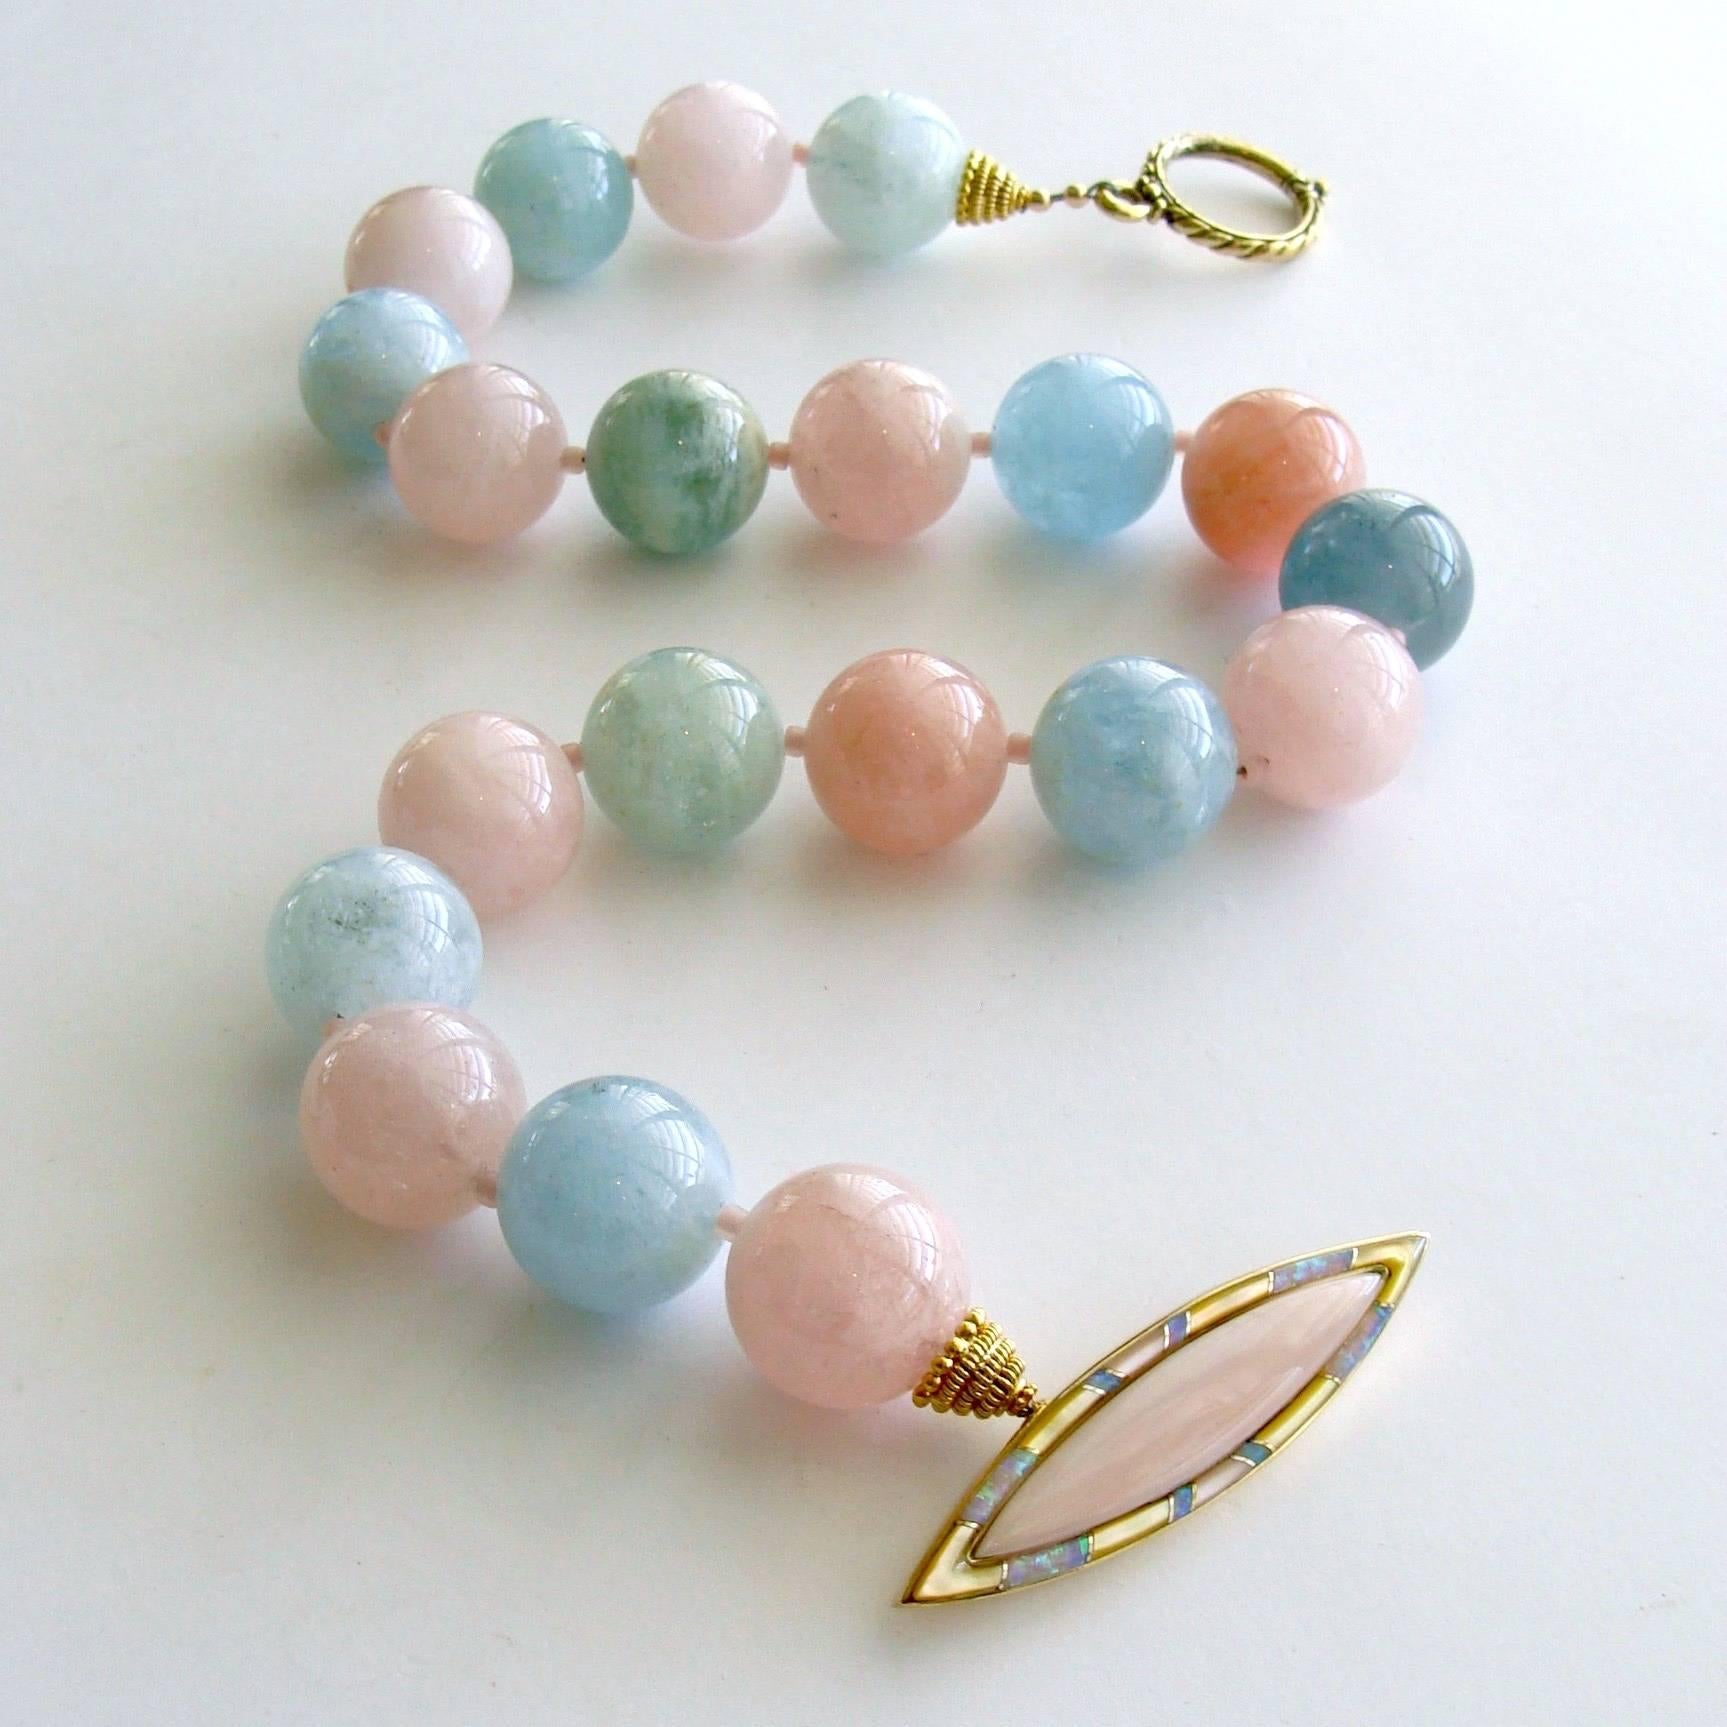 Fontanne III Necklace.

Beryl is a family name that include stones in many colors - aquamarine (soft blue/green) and morganite (soft pink/peach) being the most common.  These luxe 20mm (.78 inches diameter) pastel confections are almost to good to